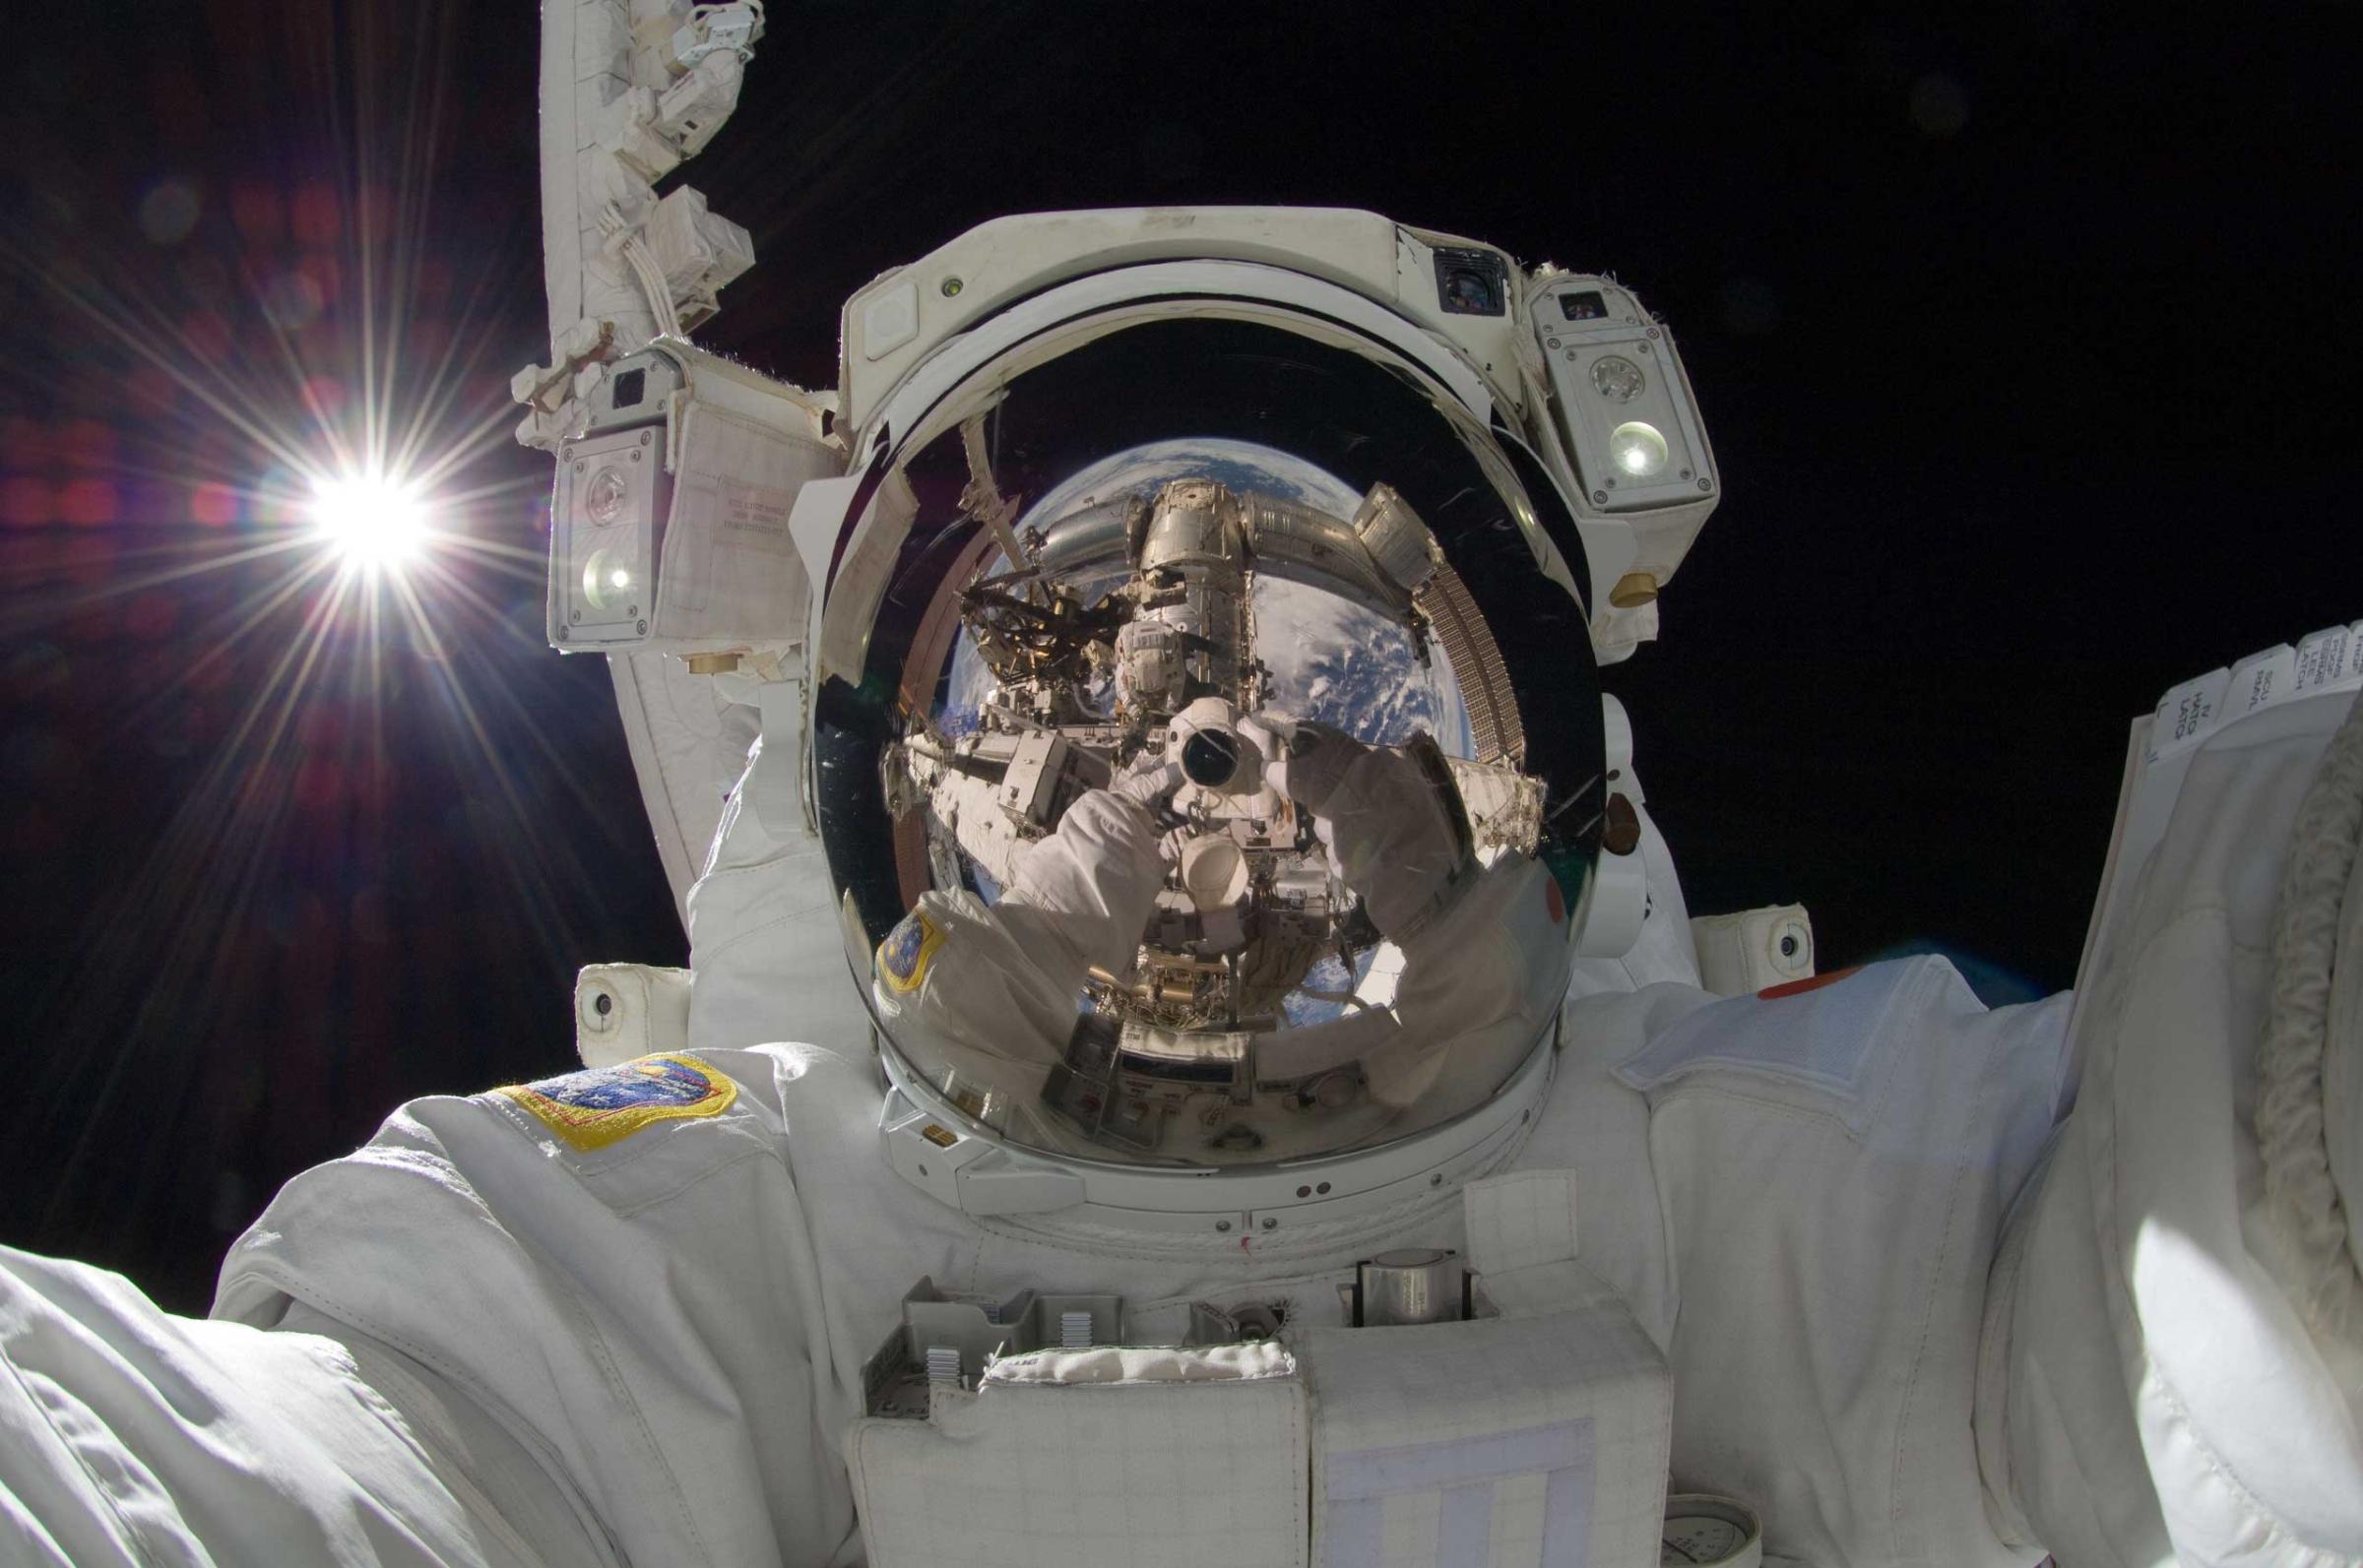 JAXA astronaut Aki Hoshide takes a self-portrait during Expedition 32 in September 2012. “Visible in this outworldly assemblage is the Sun, the Earth, two portions of a robotic arm, an astronaut’s spacesuit, the deep darkness of space, and the unusual camera taking the picture,” NASA wrote. Credit: NASA